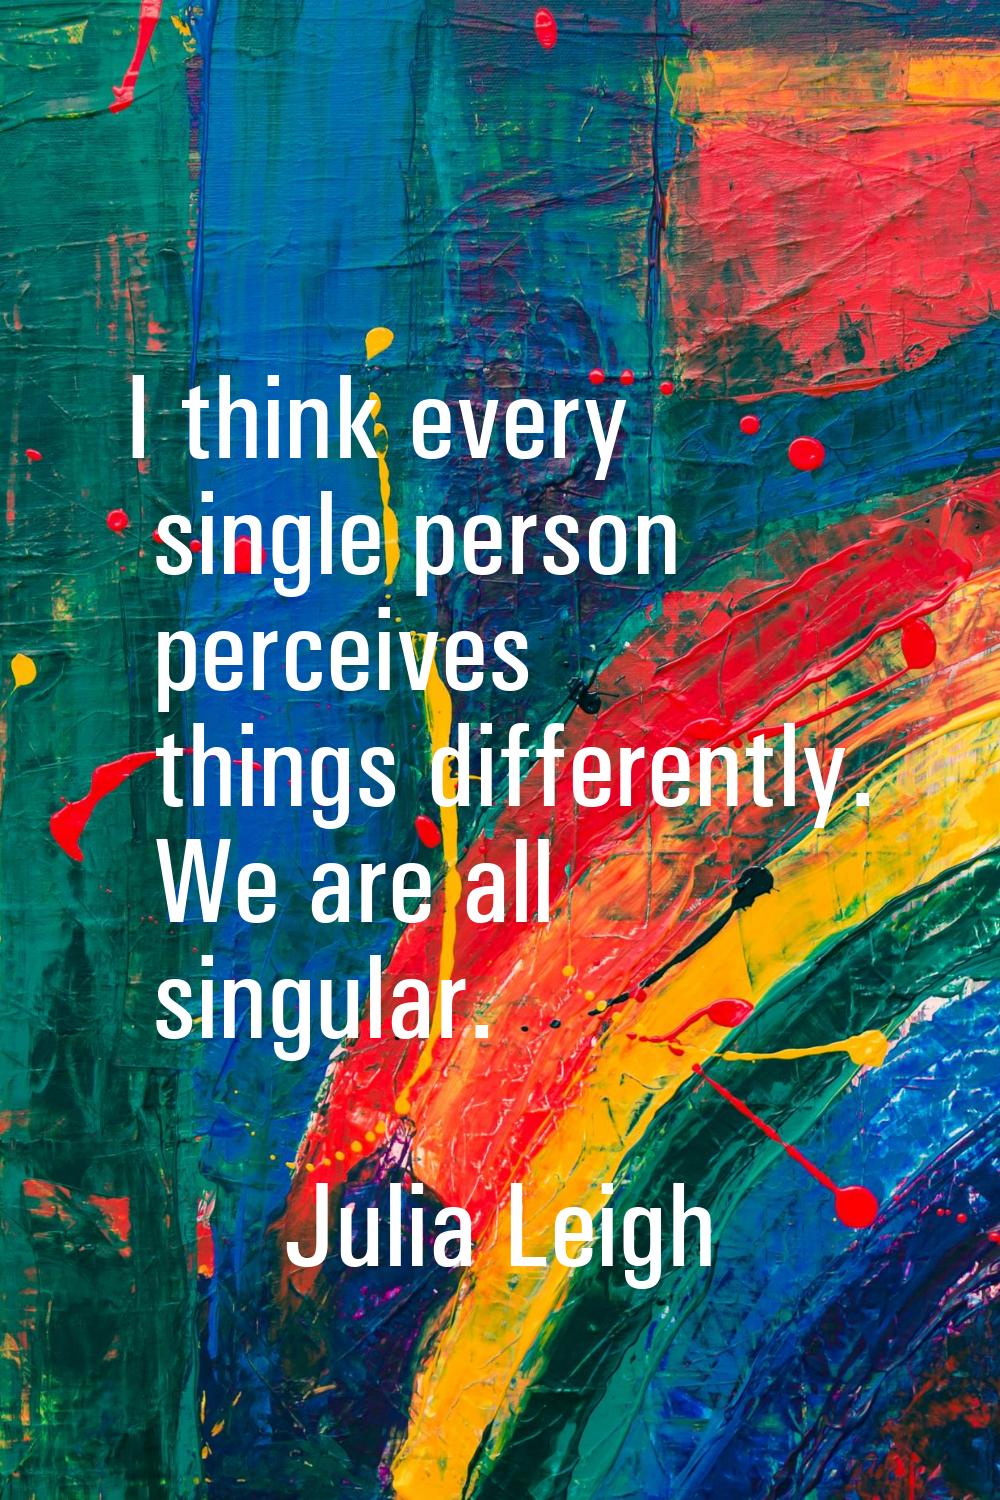 I think every single person perceives things differently. We are all singular.